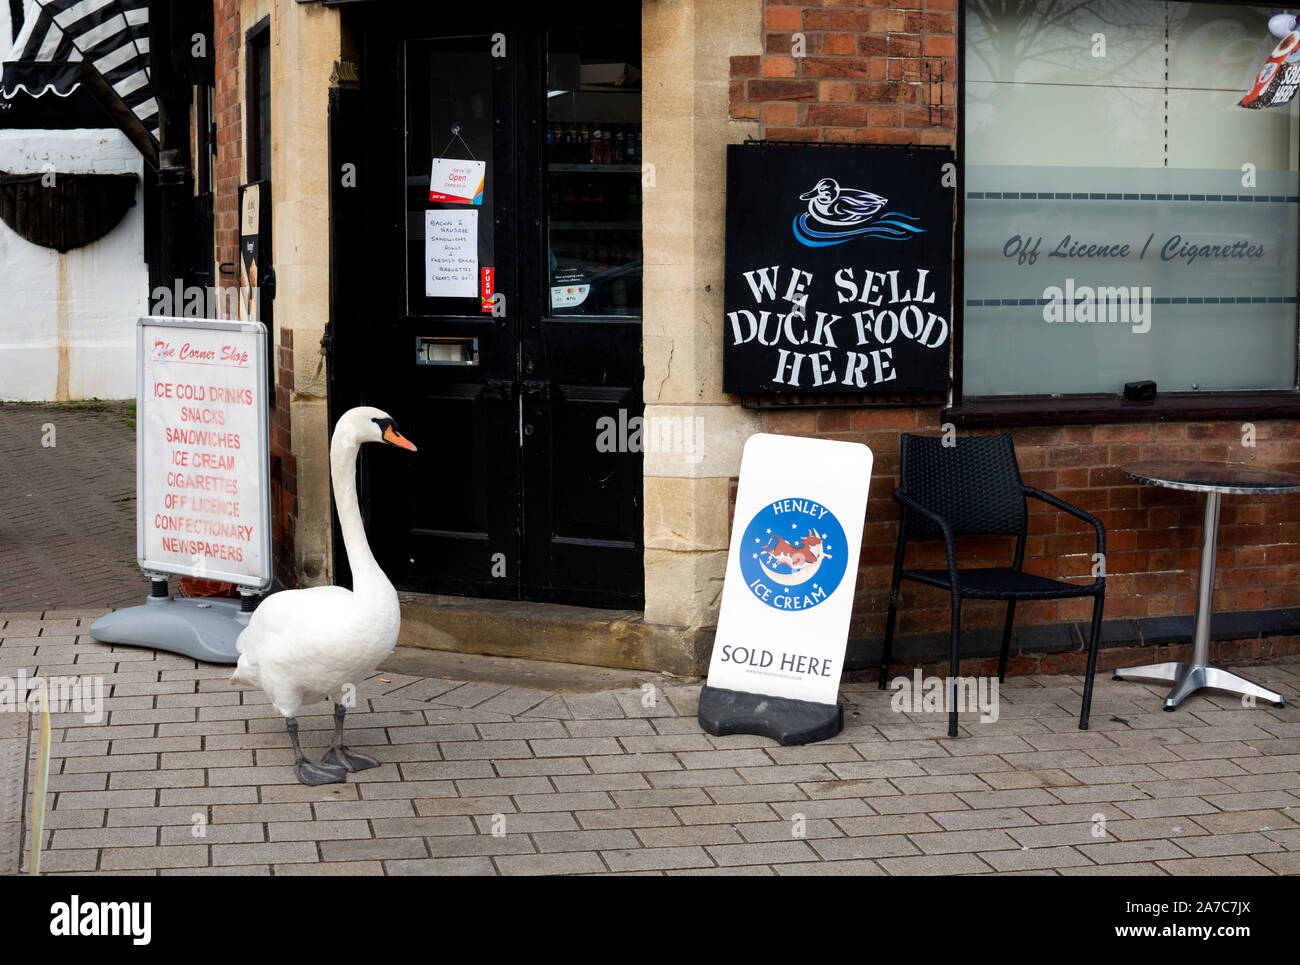 A swan outside a shop with 'We sell duck food here' sign, Stratford-upon-Avon, UK Stock Photo